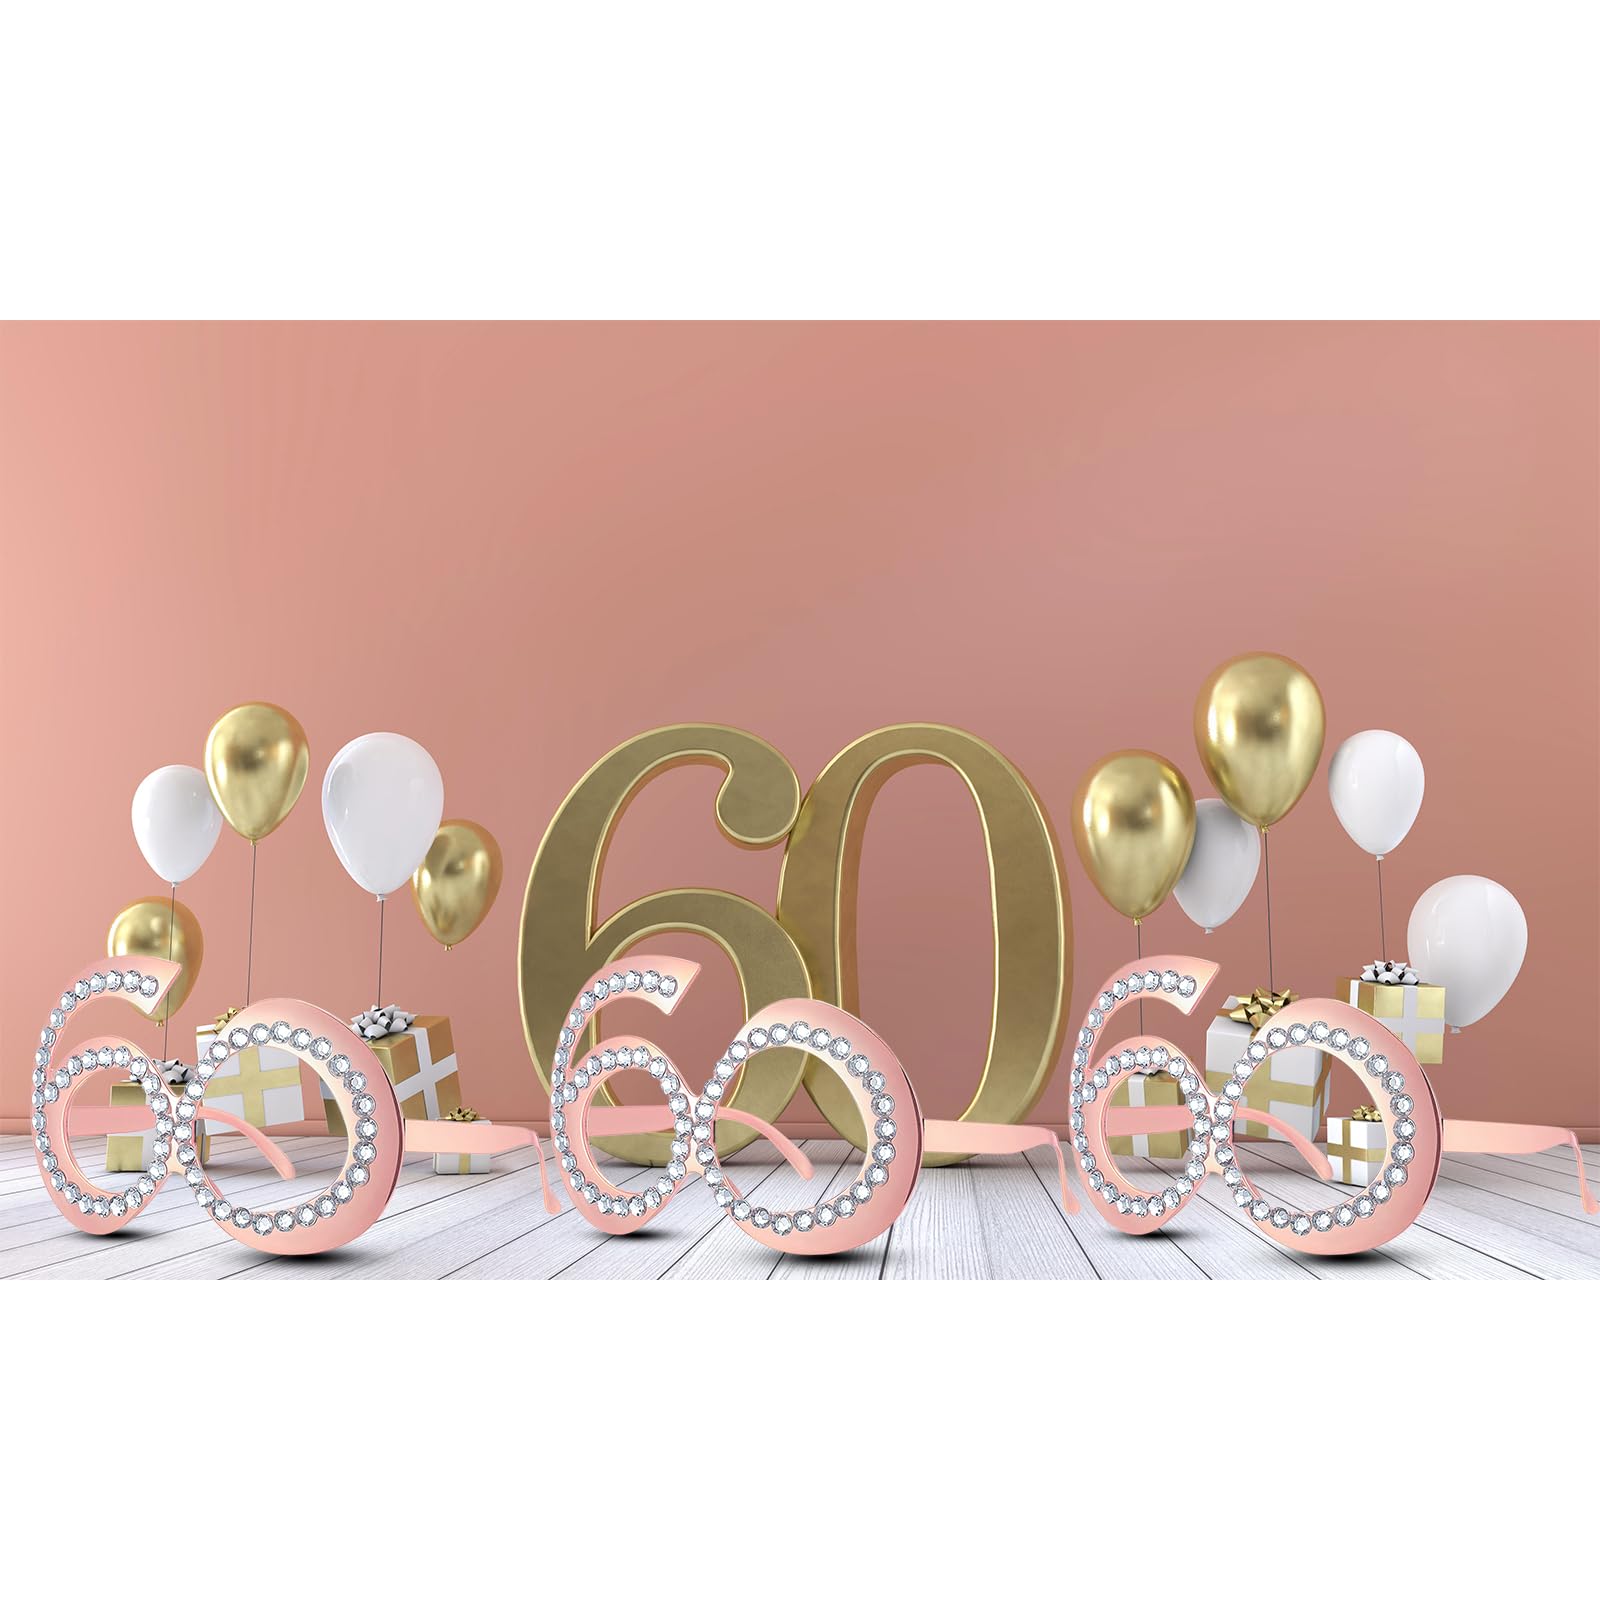 cssopenss 12 Pieces 60th Birthday Glasses, 60th birthday party glasses, Funny Plastic Eyewear 60th Birthday decorations for Women's Birthday Party Celebration Decor Favors(Rose Gold)